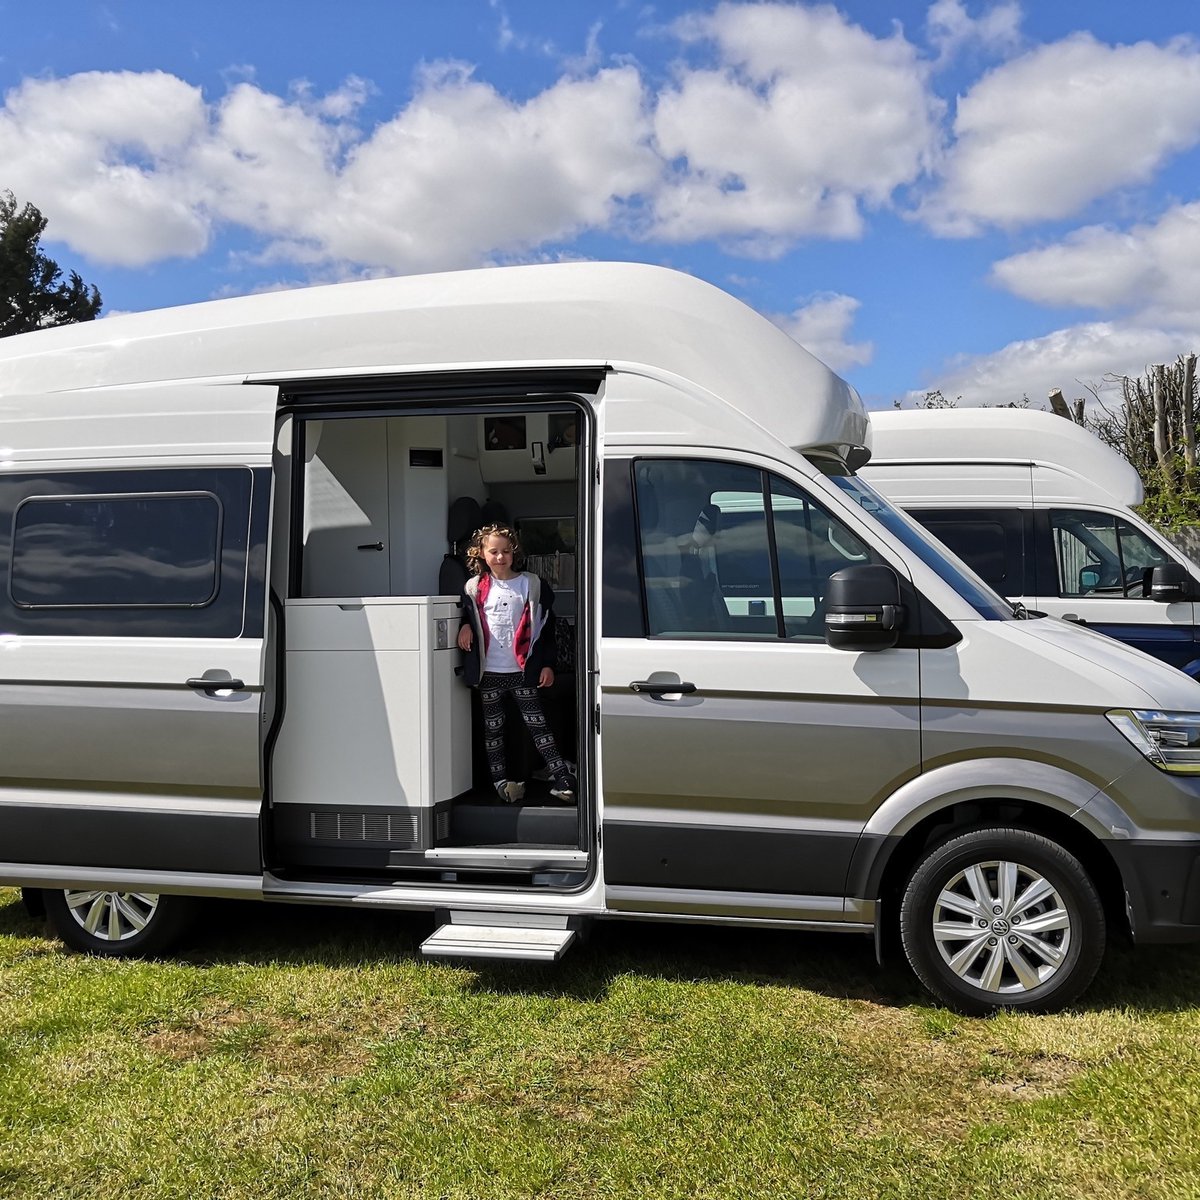 See us @HornimanMarket Sunday 12th February from 10am-3pm & check out our #VWCalifornia Ocean #CamperVan & Grand California #Motorhome Let's book your 2023 holiday! Also see the NEW Brick Dinos exhibition @HornimanMuseum whats not to love🦖🚌 @FHTAse23 @SE23dotcom @honoroakorg